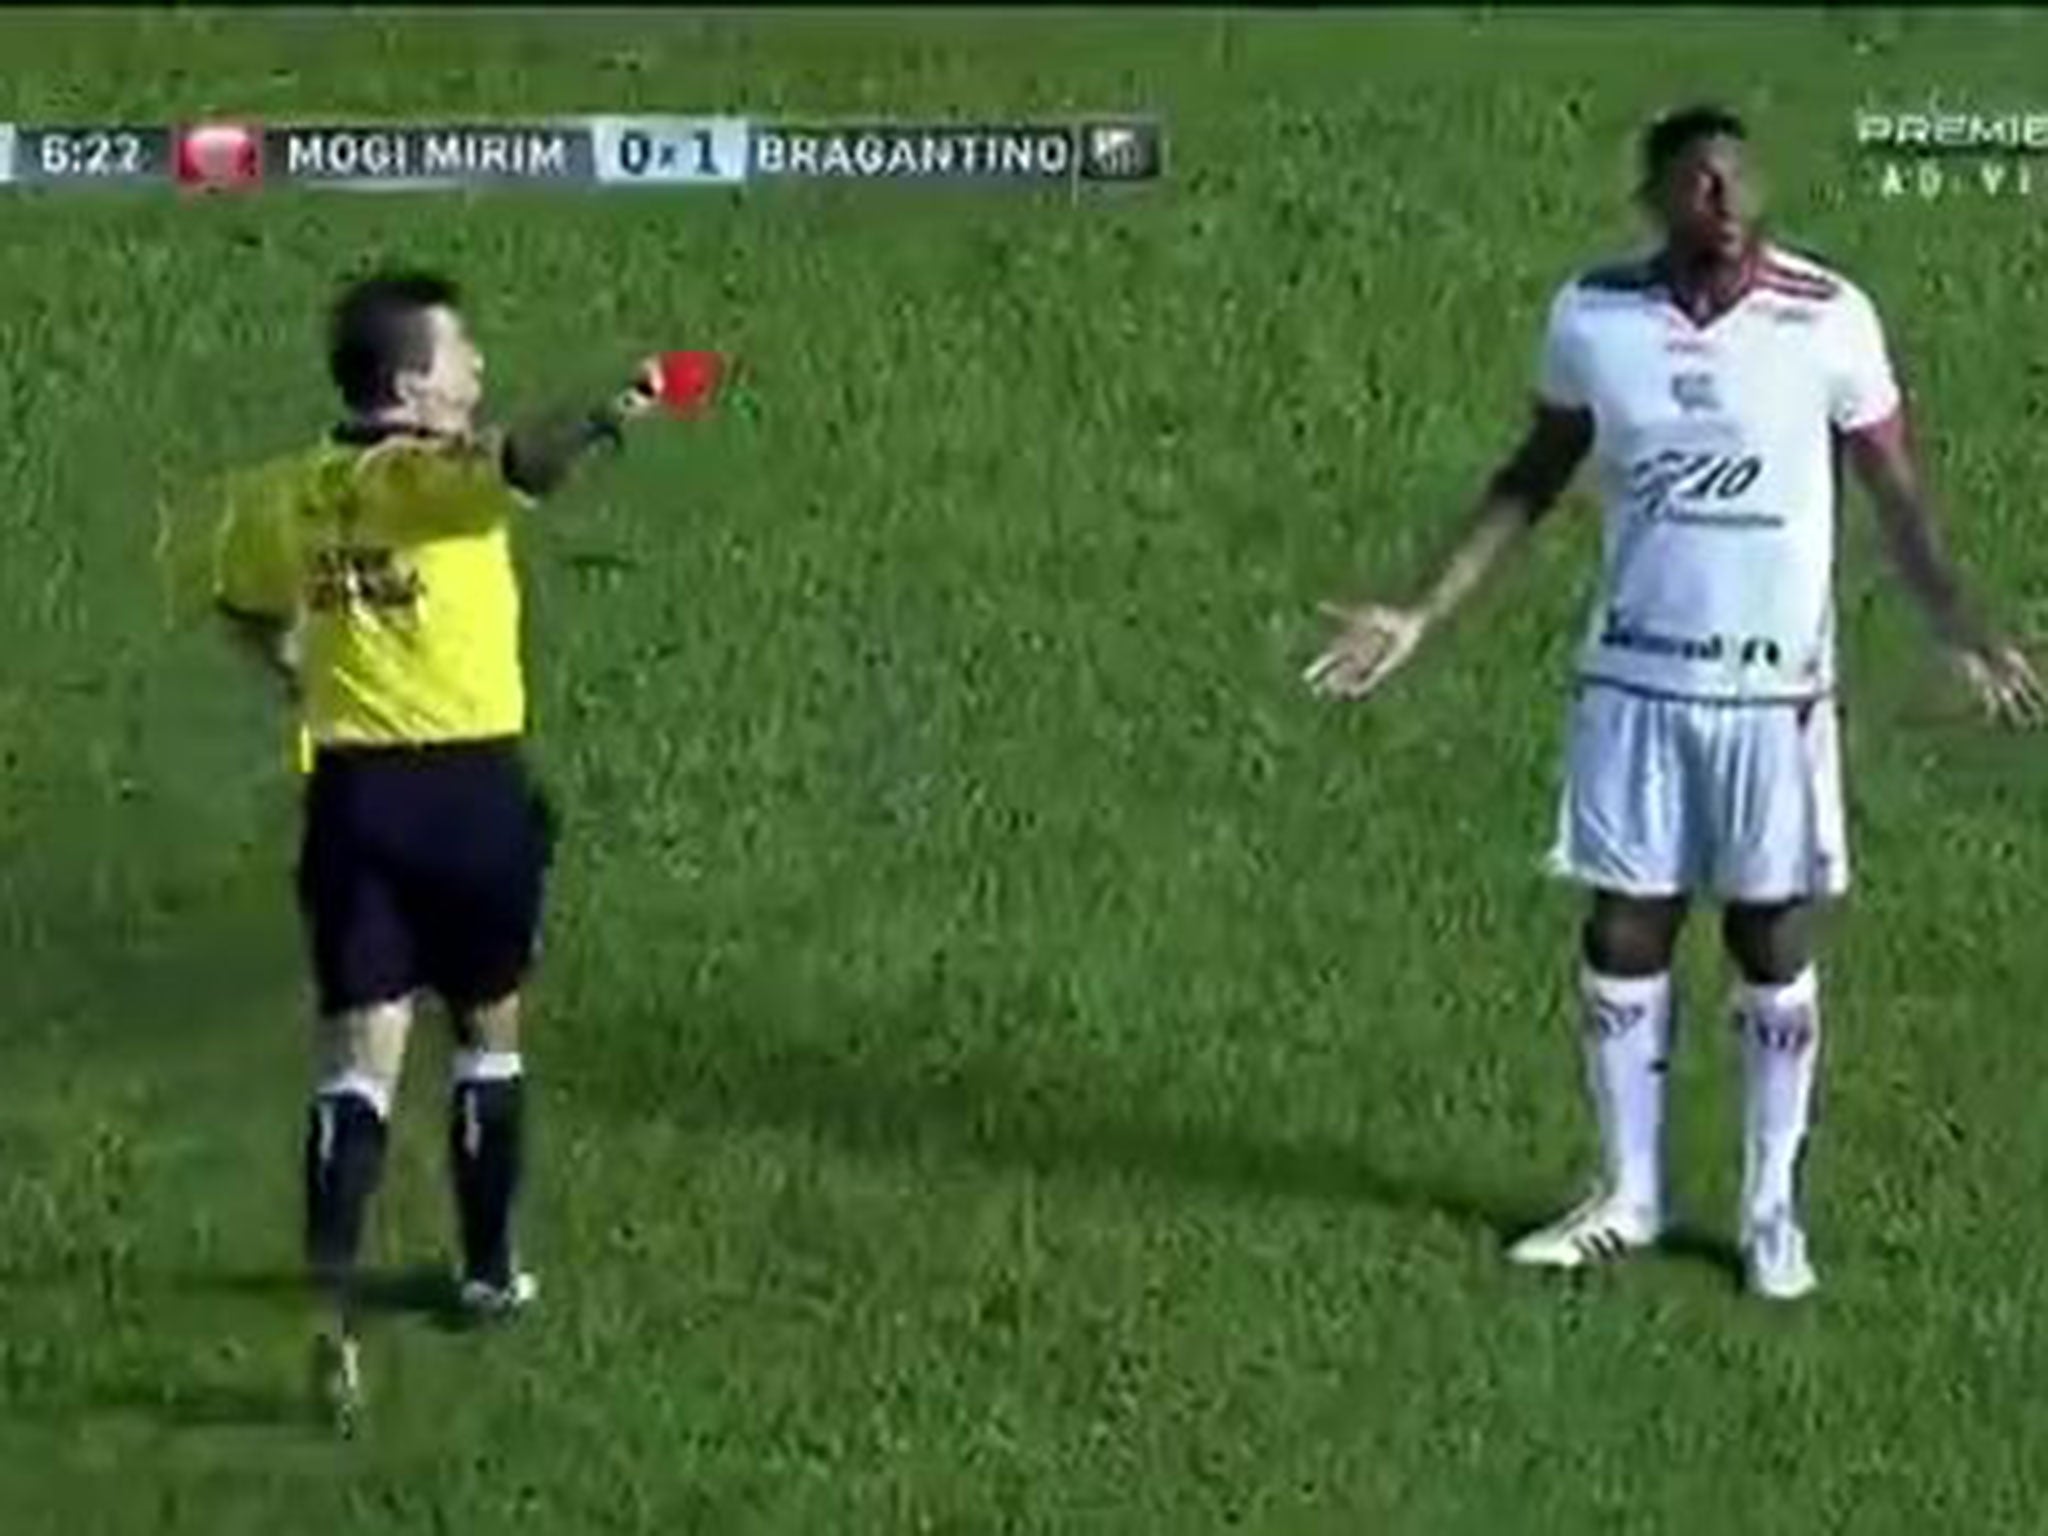 Paulao is shown a red card, much to his bemusement